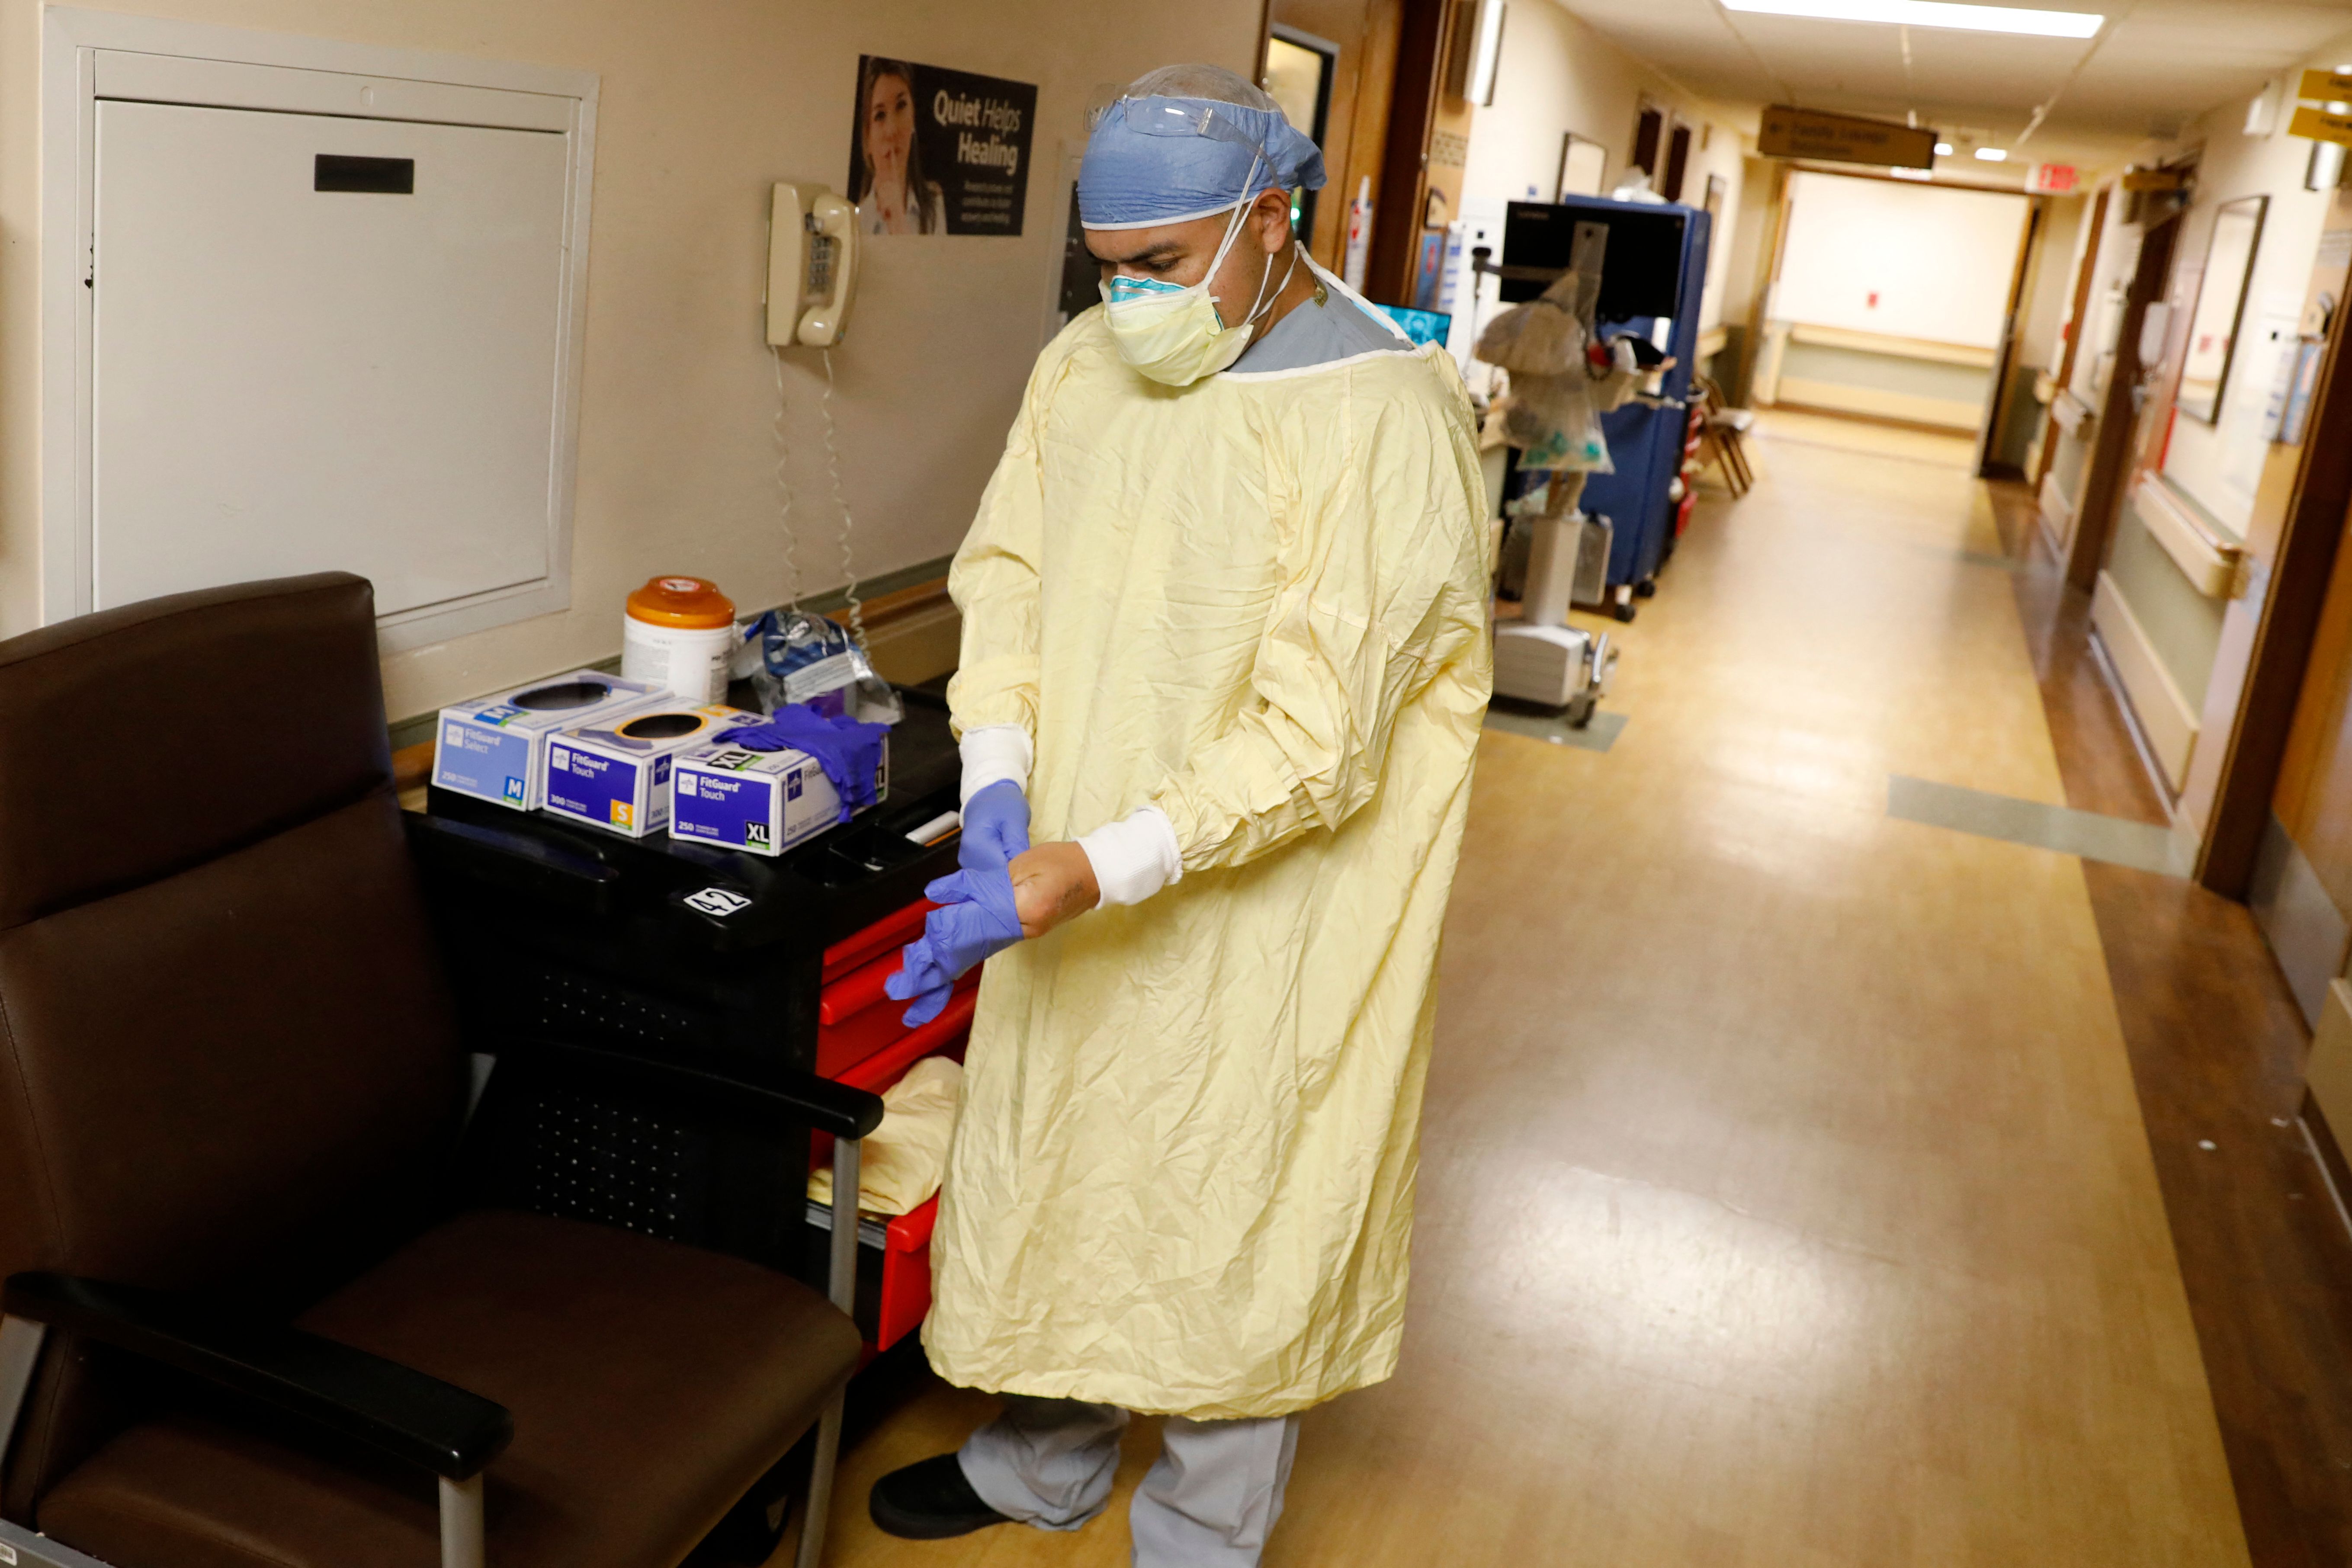 US Army Critical Care Nurse, Captain Edward Rauch Jr., prepares to enter a room of a Covid-19 patient on a ventilator at Beaumont Hospital in Dearborn, Michigan, on December 17, 2021. - Beaumont Hospital is assisted by 23 military medical personnel from the US Army, sent by the Department of Defense, to assist during the health system's fourth Covid-19 surge. 